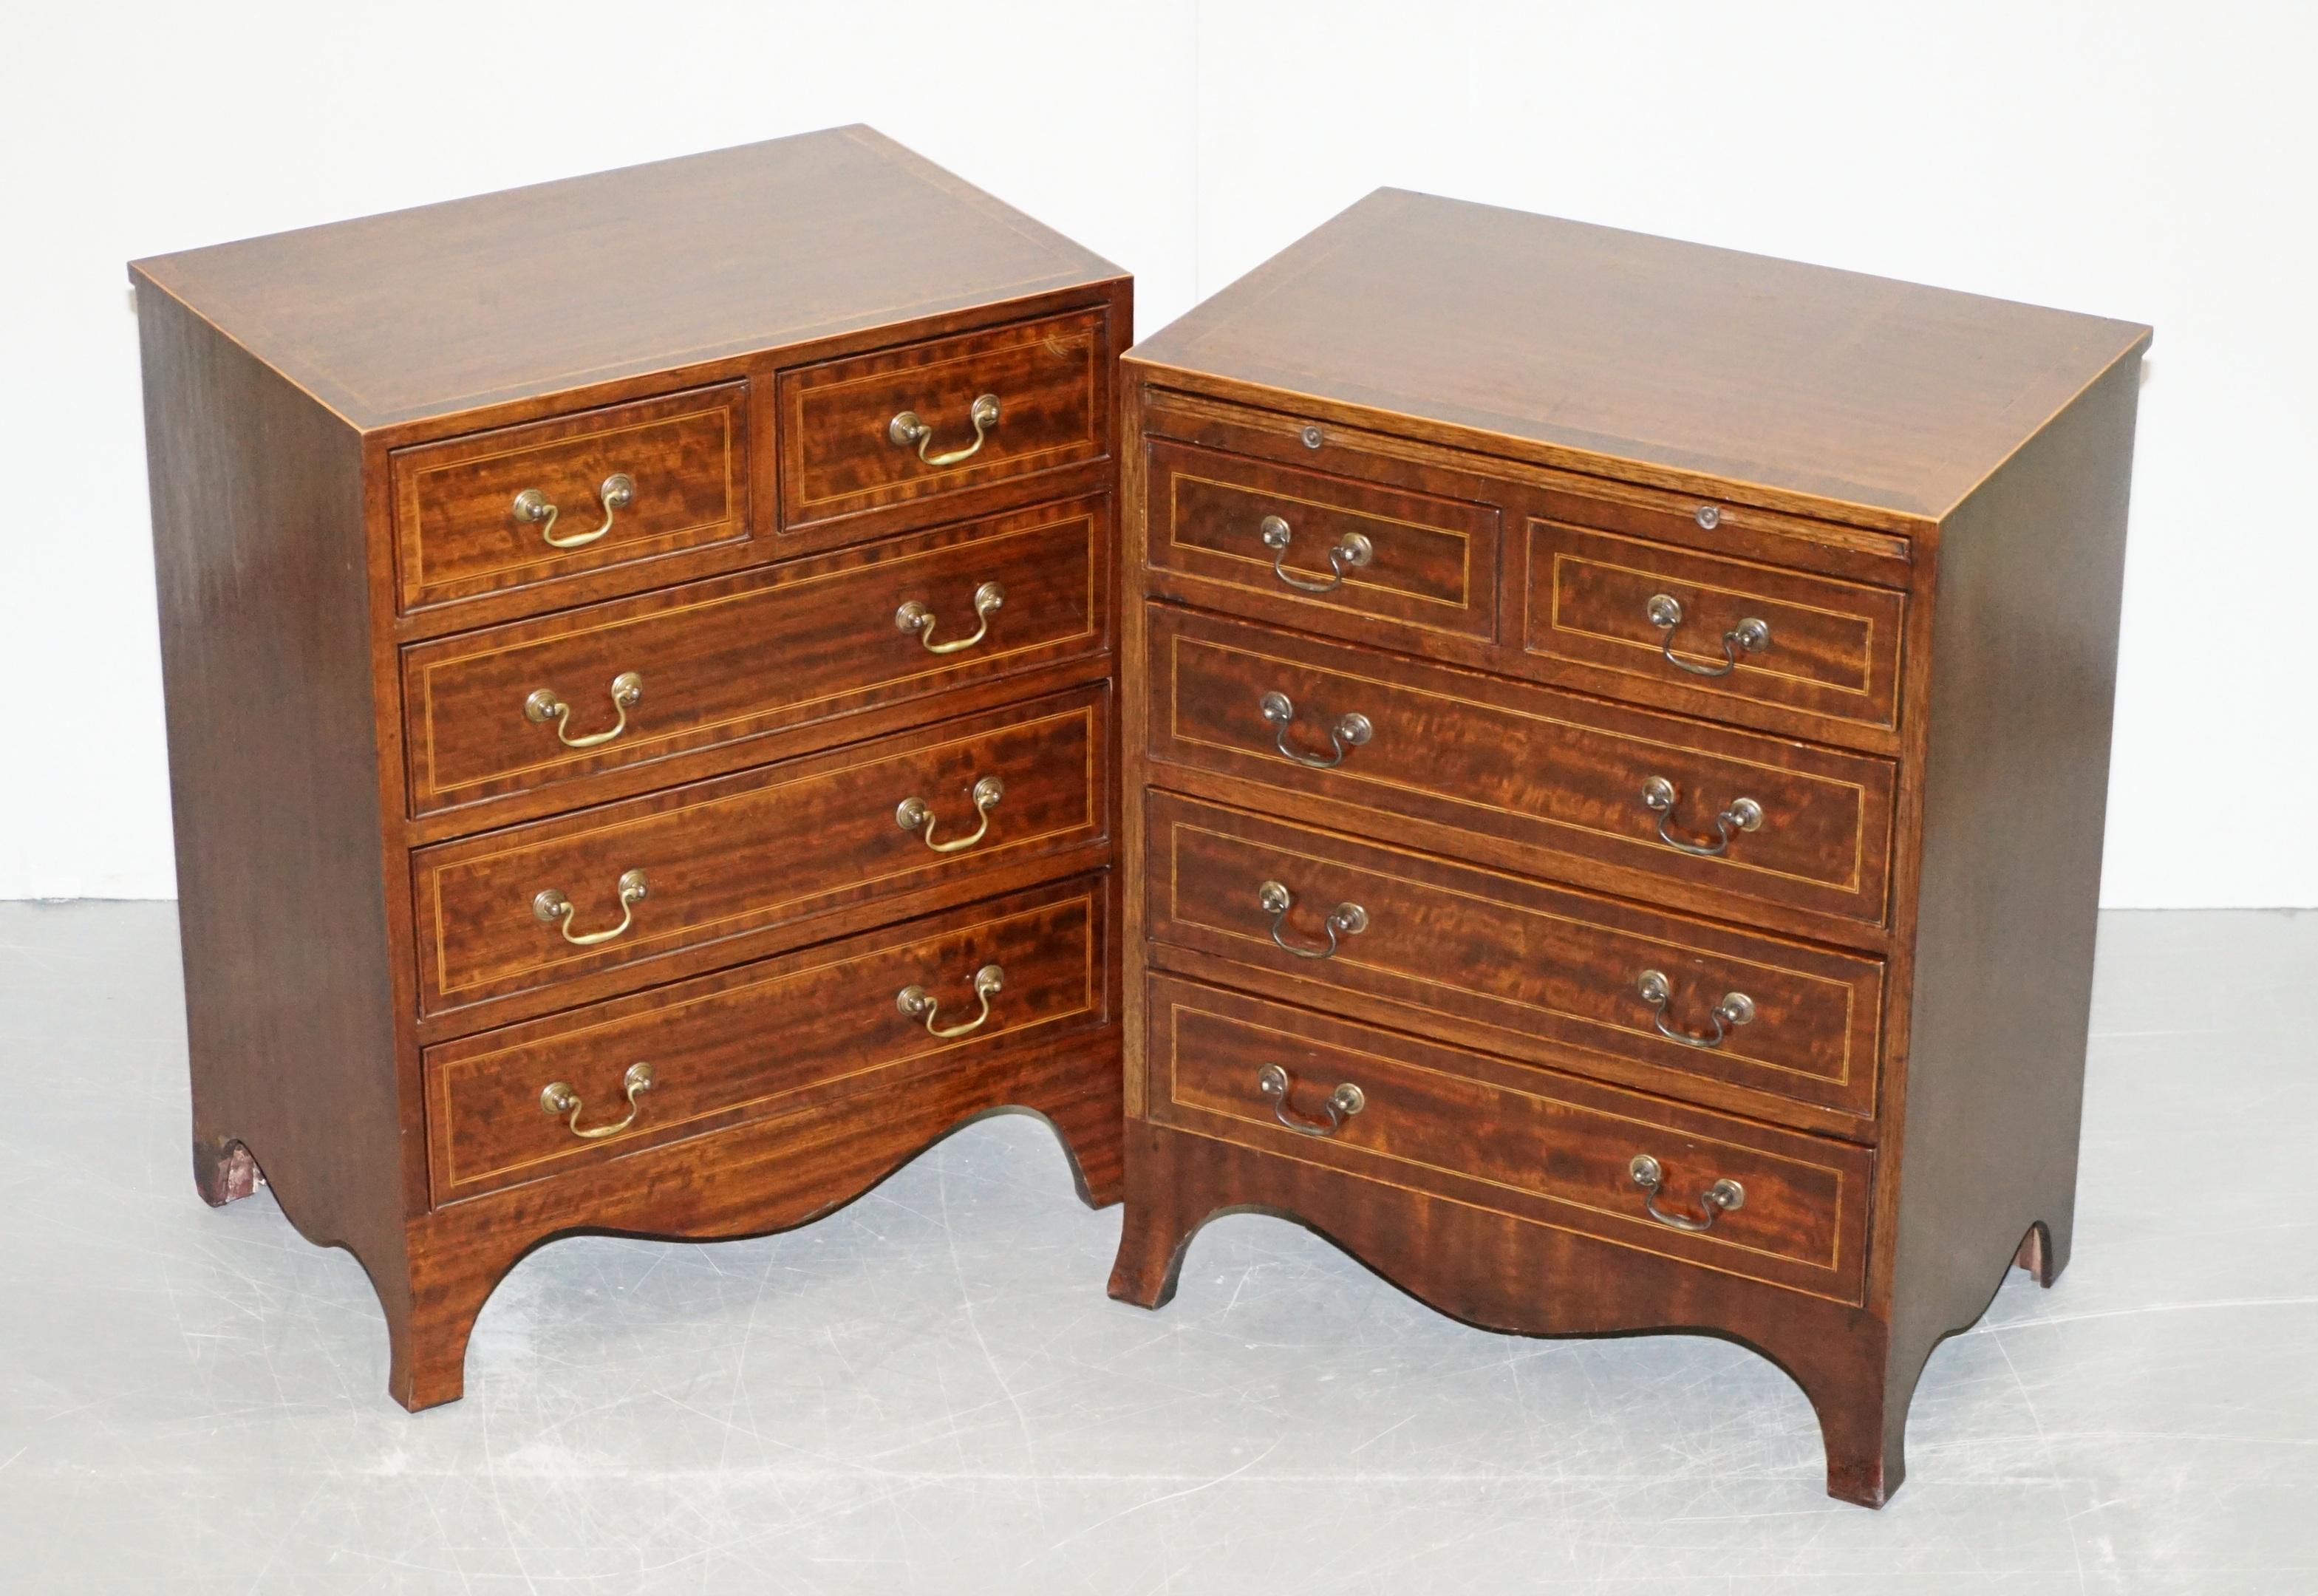 We are delighted to offer for sale this stunning pair of late Victorian handmade flamed mahogany side table sized chests of drawers with butlers serving tray.

These are a very fine pair of drawers, they are exquisite quality, the cuts of mahogany